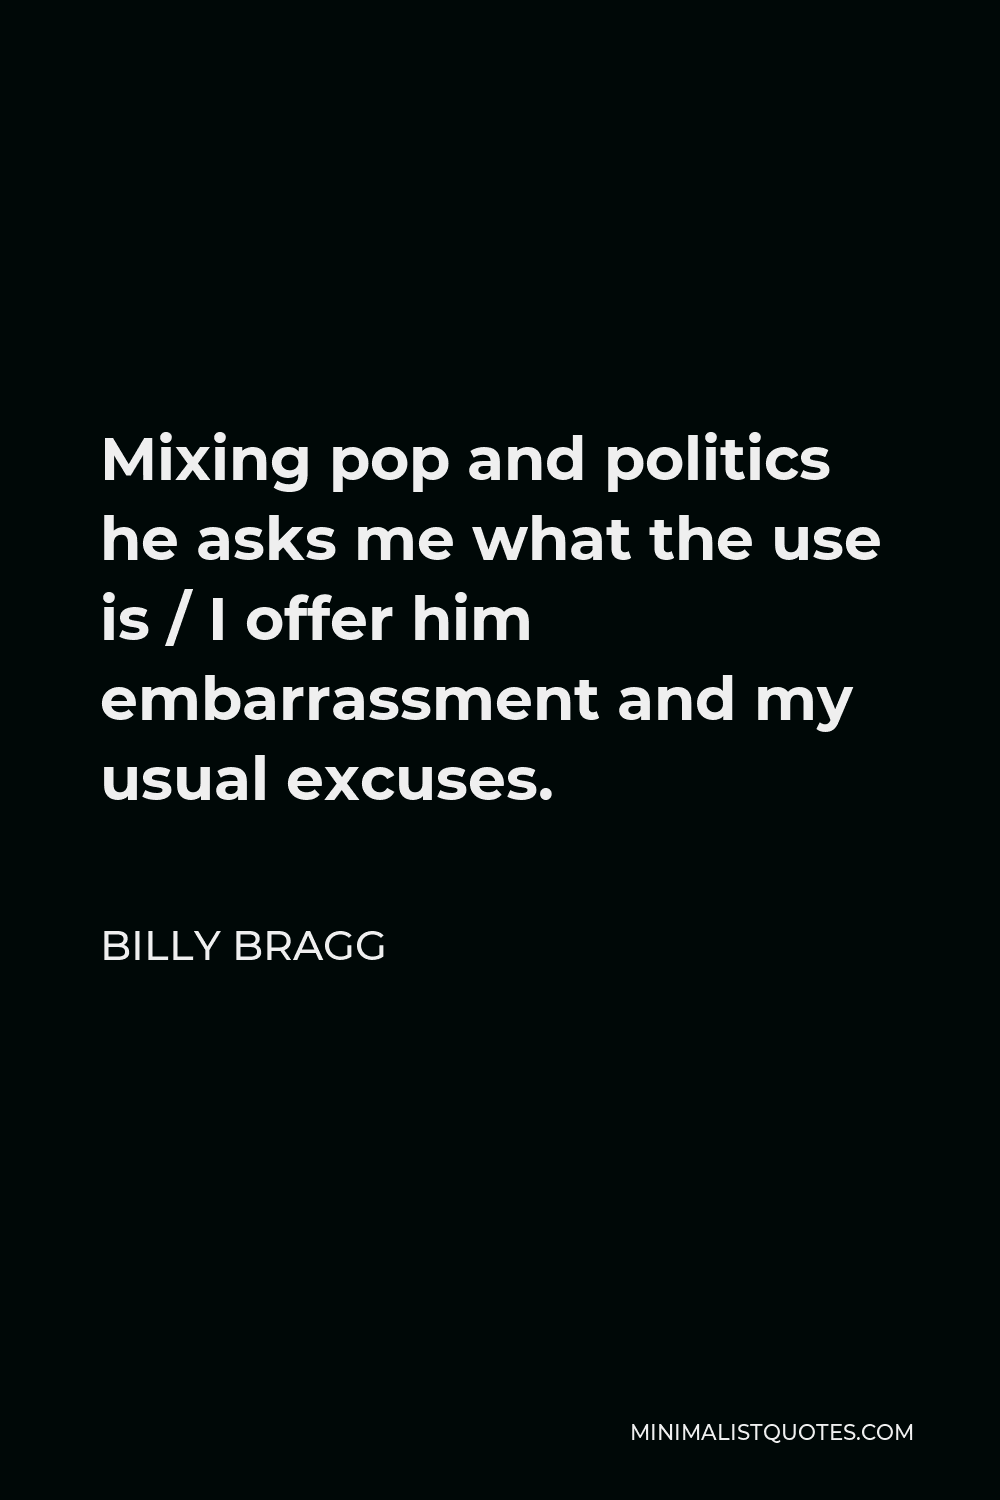 Billy Bragg Quote - Mixing pop and politics he asks me what the use is / I offer him embarrassment and my usual excuses.